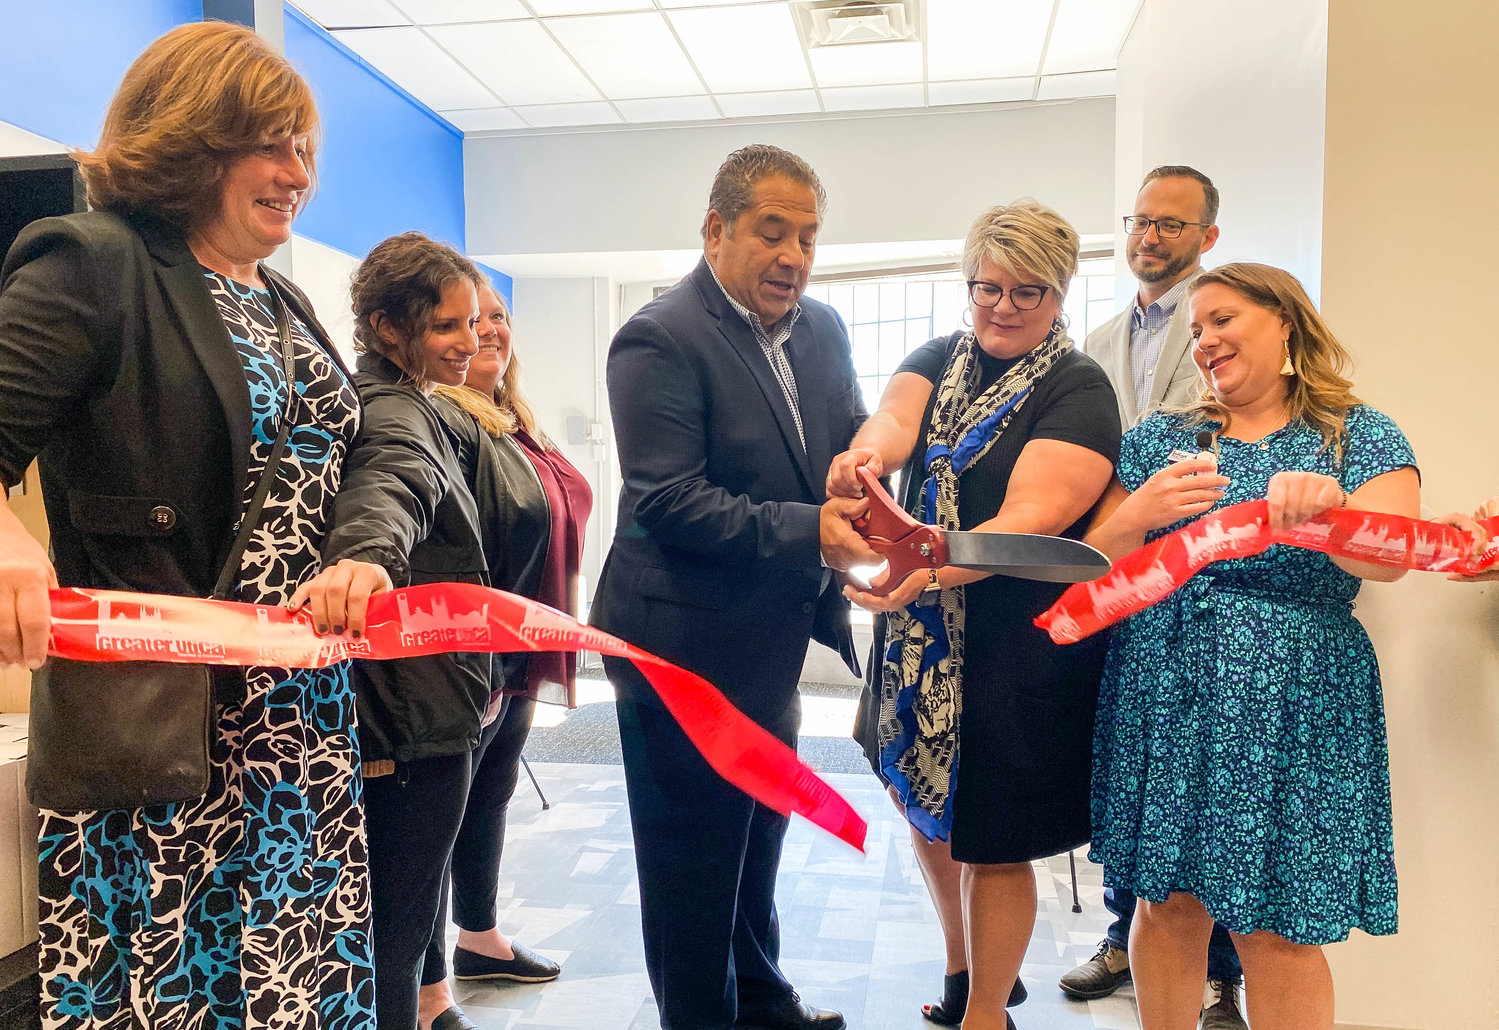 Officials gather to cut the ribbon at the grand opening of Carmina Wood Design, an architecture, engineering and interior firm, which has opened an office in downtown Utica at 54 Franklin Square.